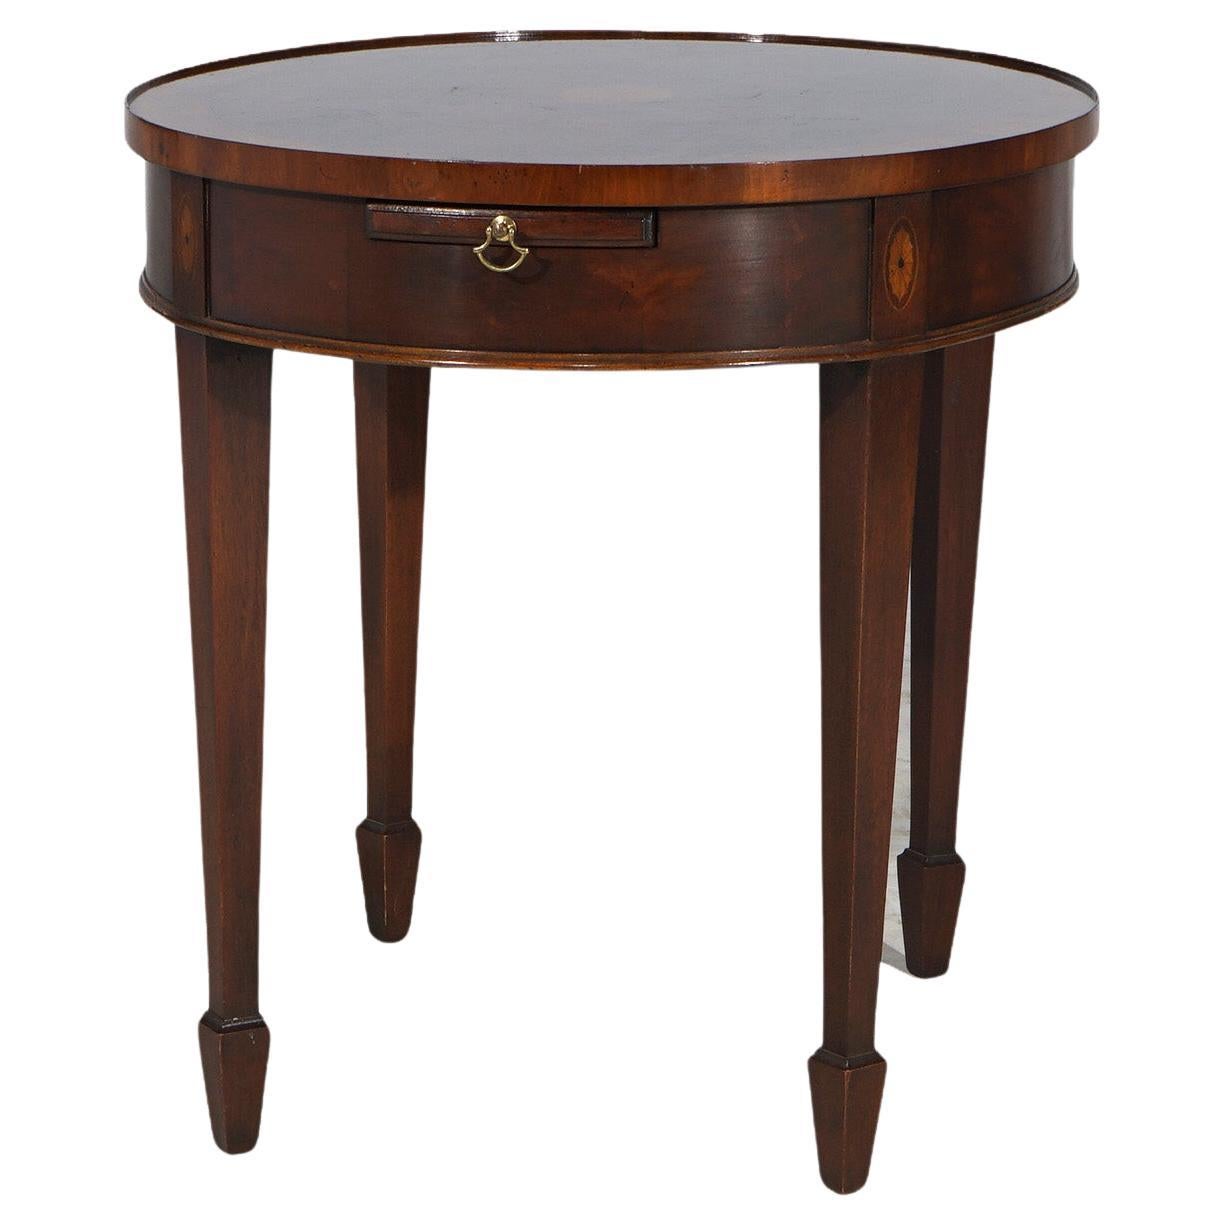 Hekman Copley Style Flame Mahogany & Satinwood Inlaid Side Table C1930 For Sale